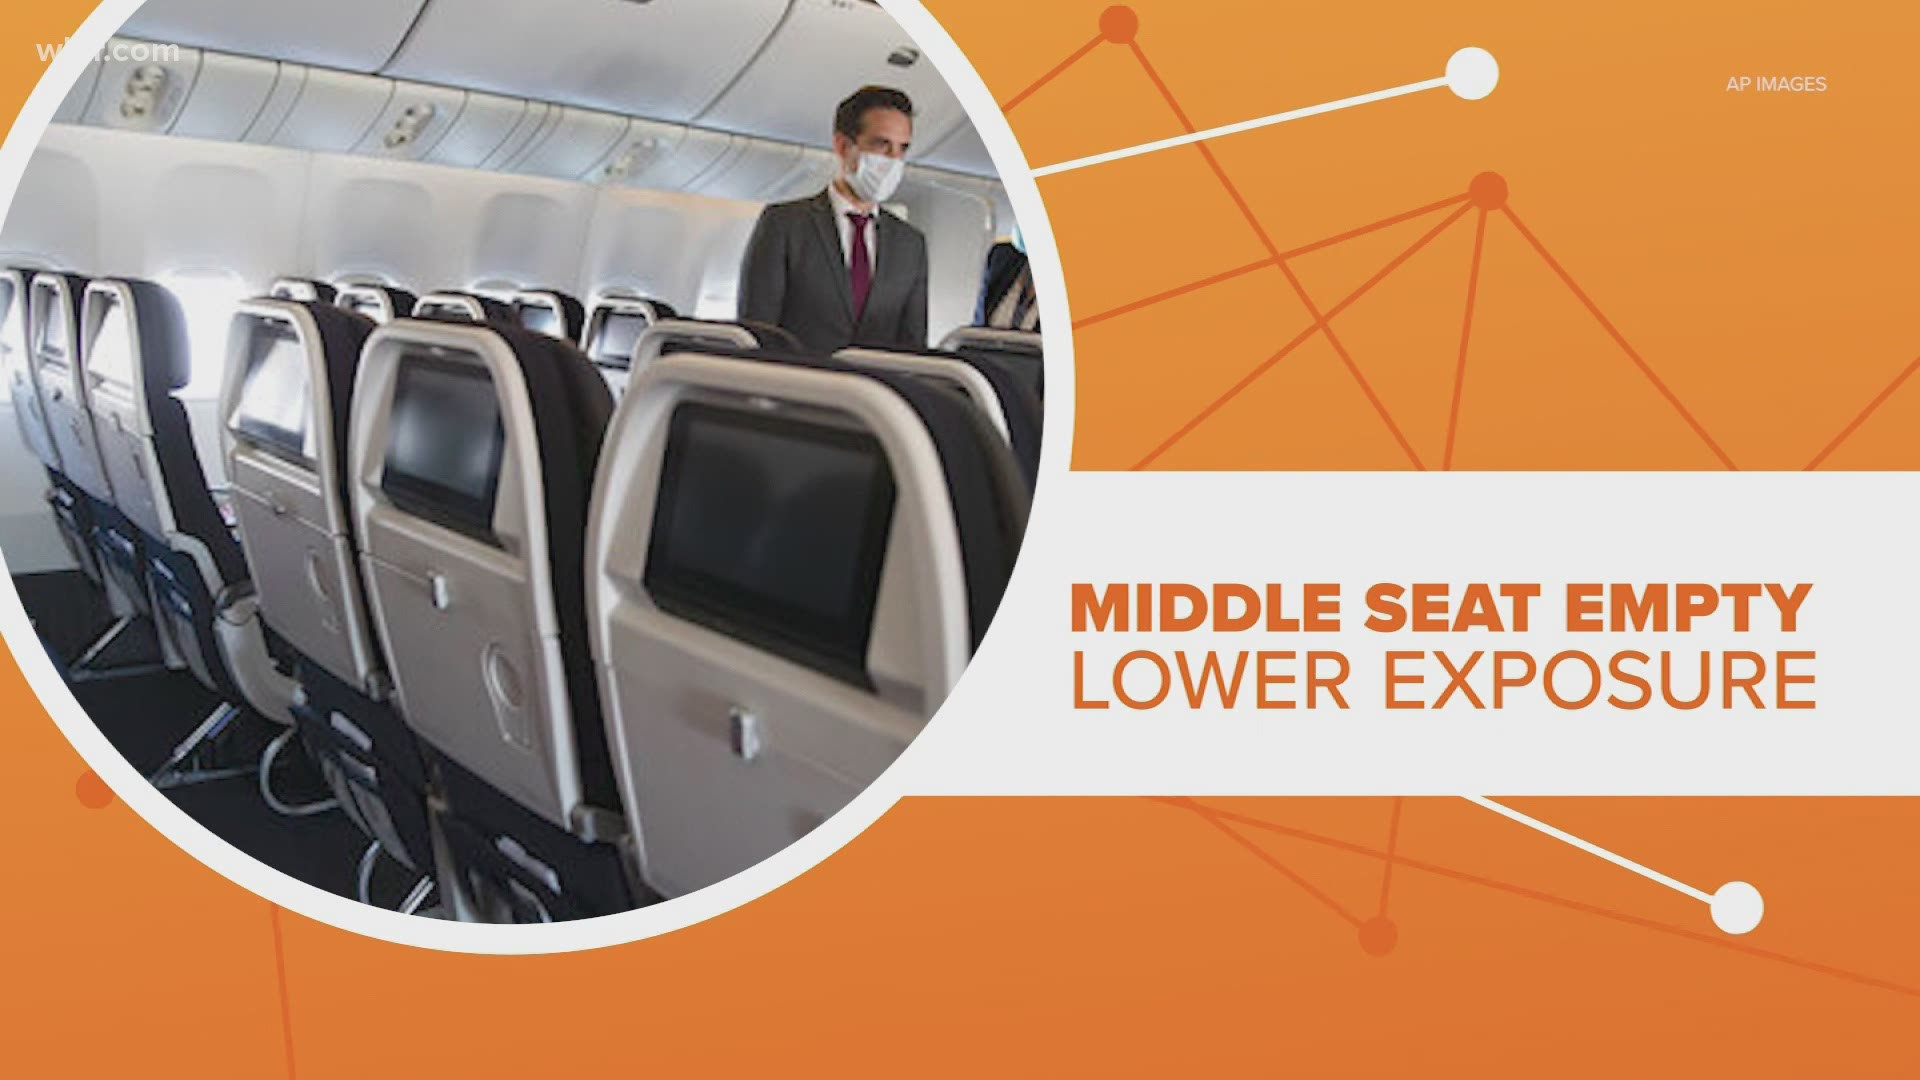 The research released by the CDC found that leaving the middle seat open on flights could reduce the risk of exposure to COVID-19 by 23% to 57%.